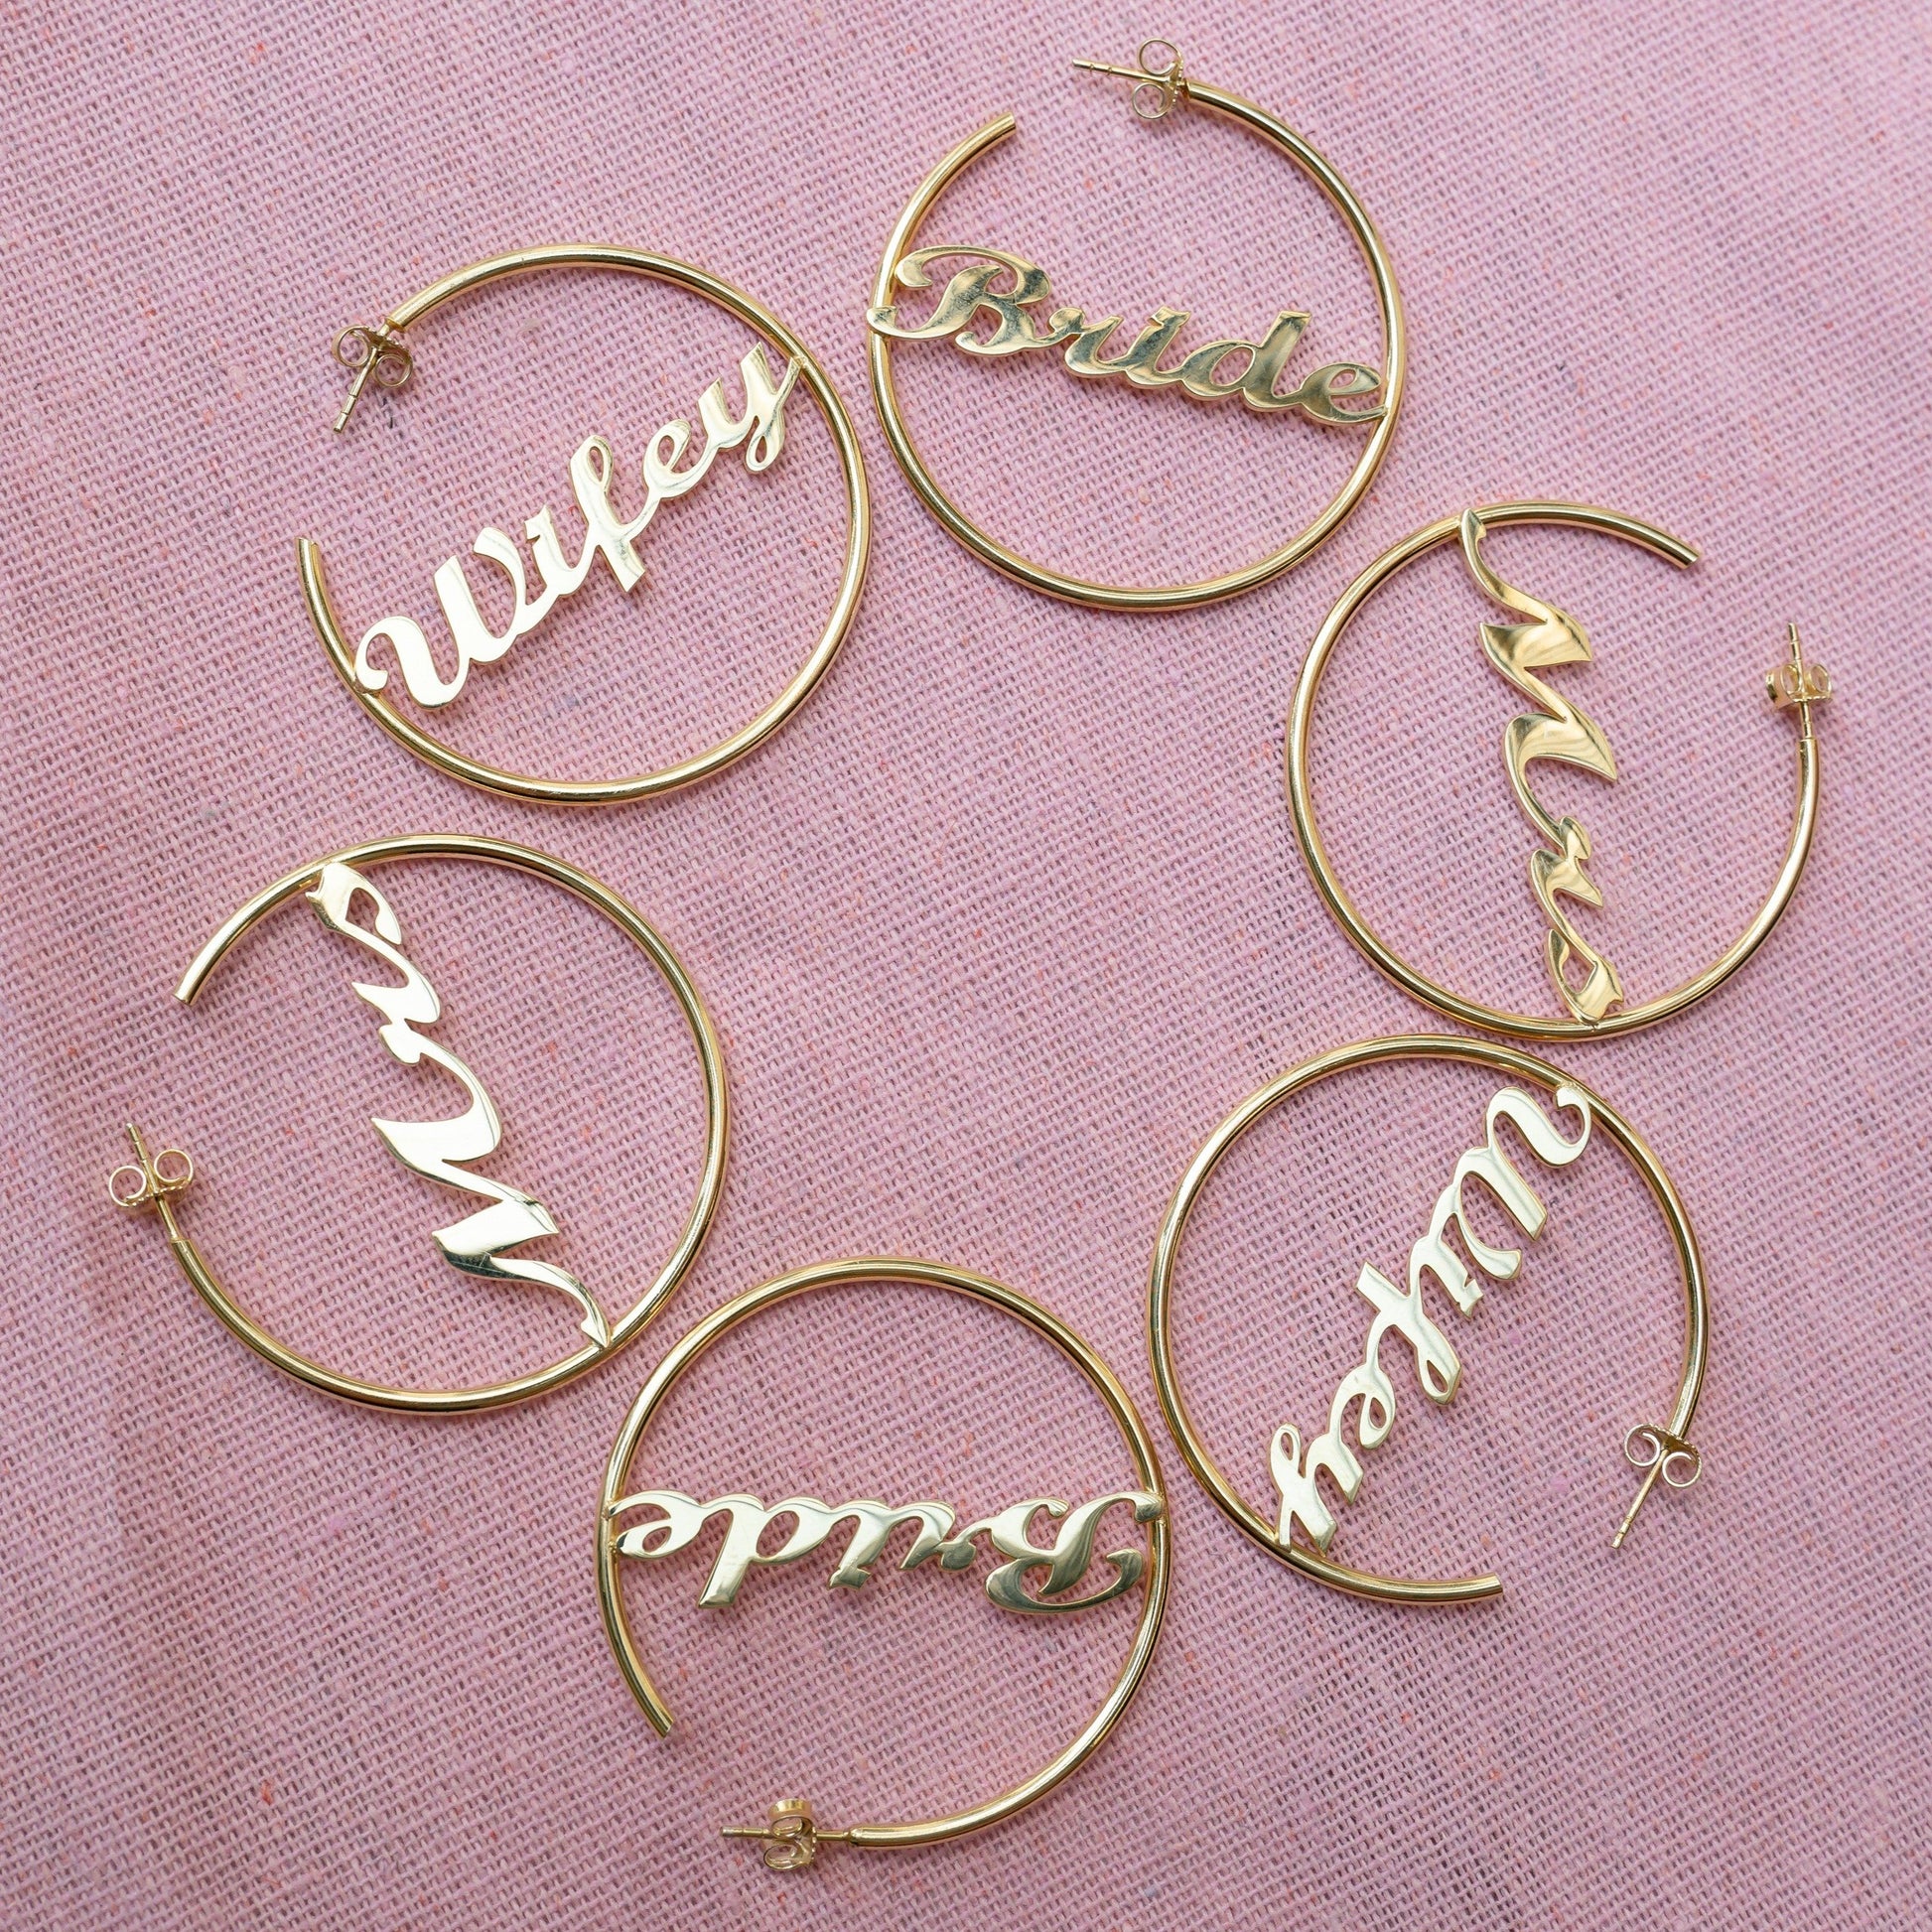 Wifey Script Hoops - PREORDER JEWELRY The Sis Kiss Gold